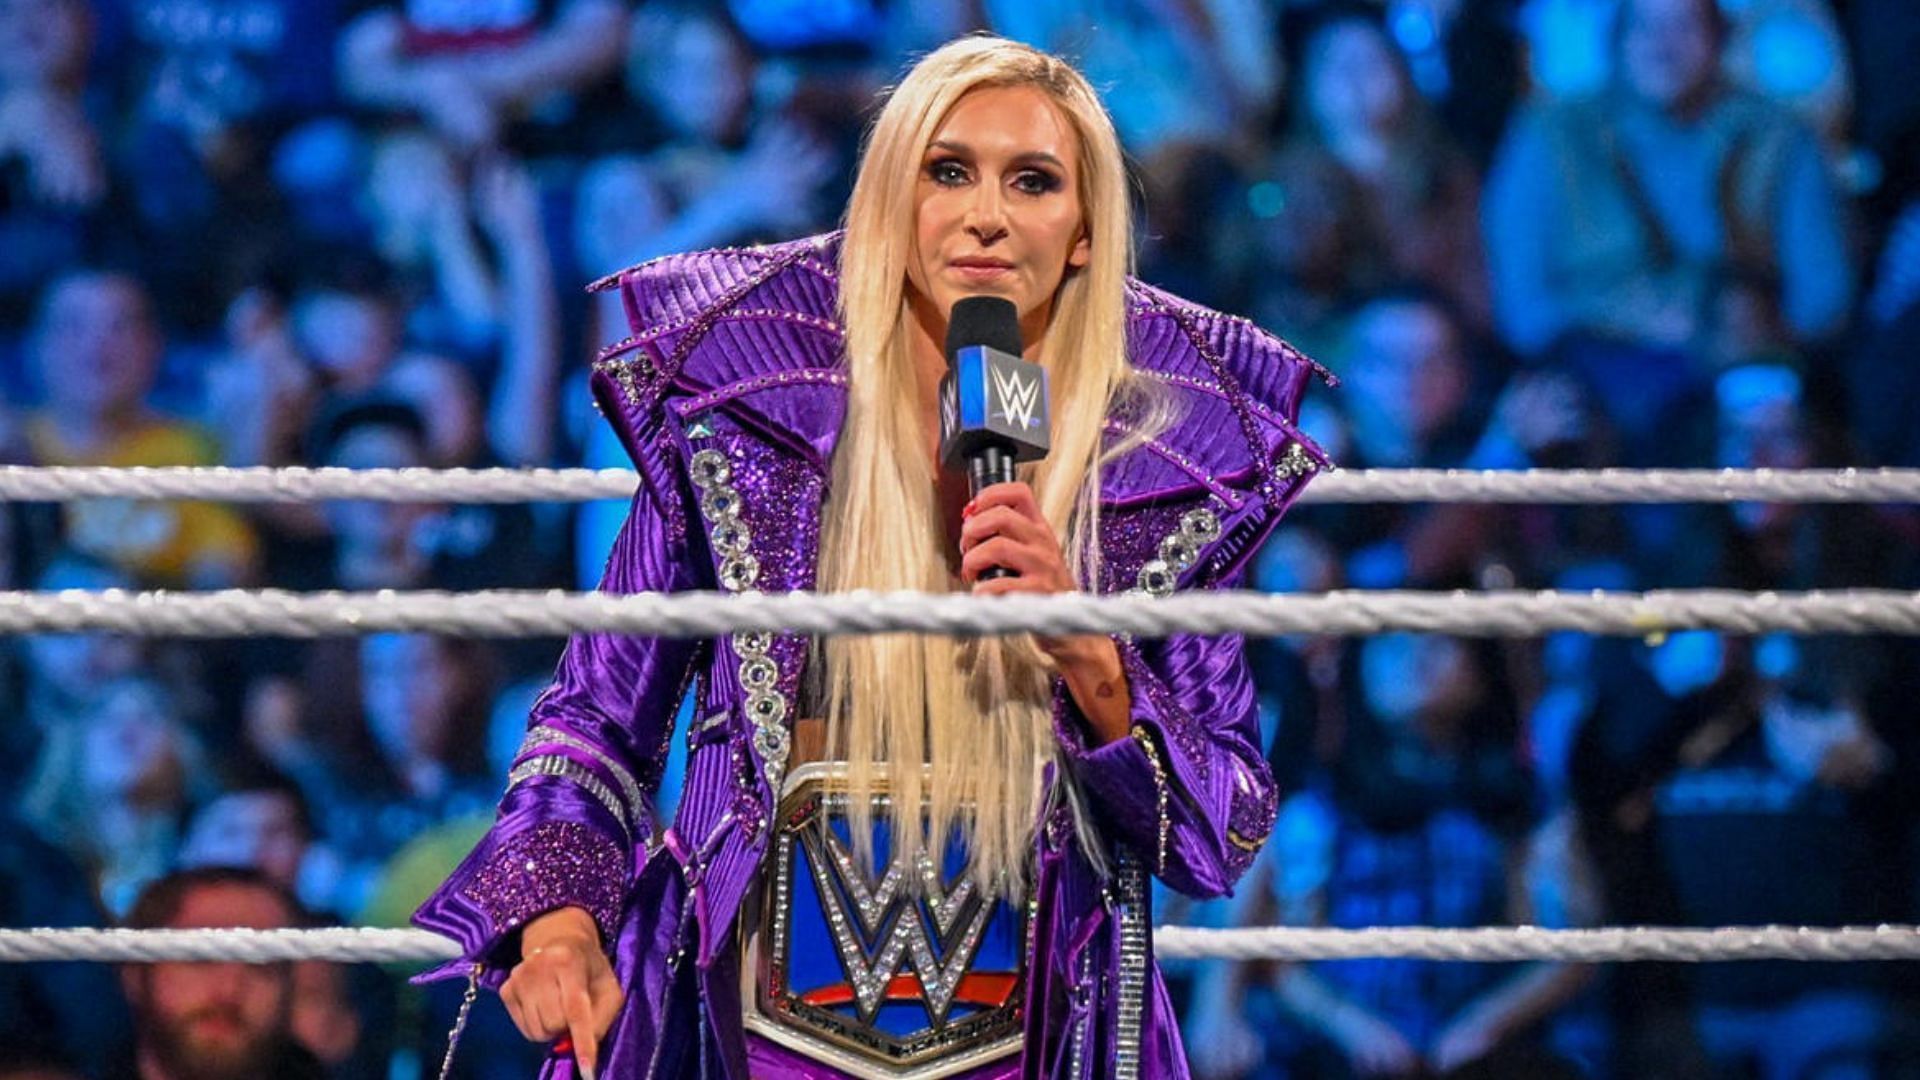 Charlotte Flair currently competes on SmackDown